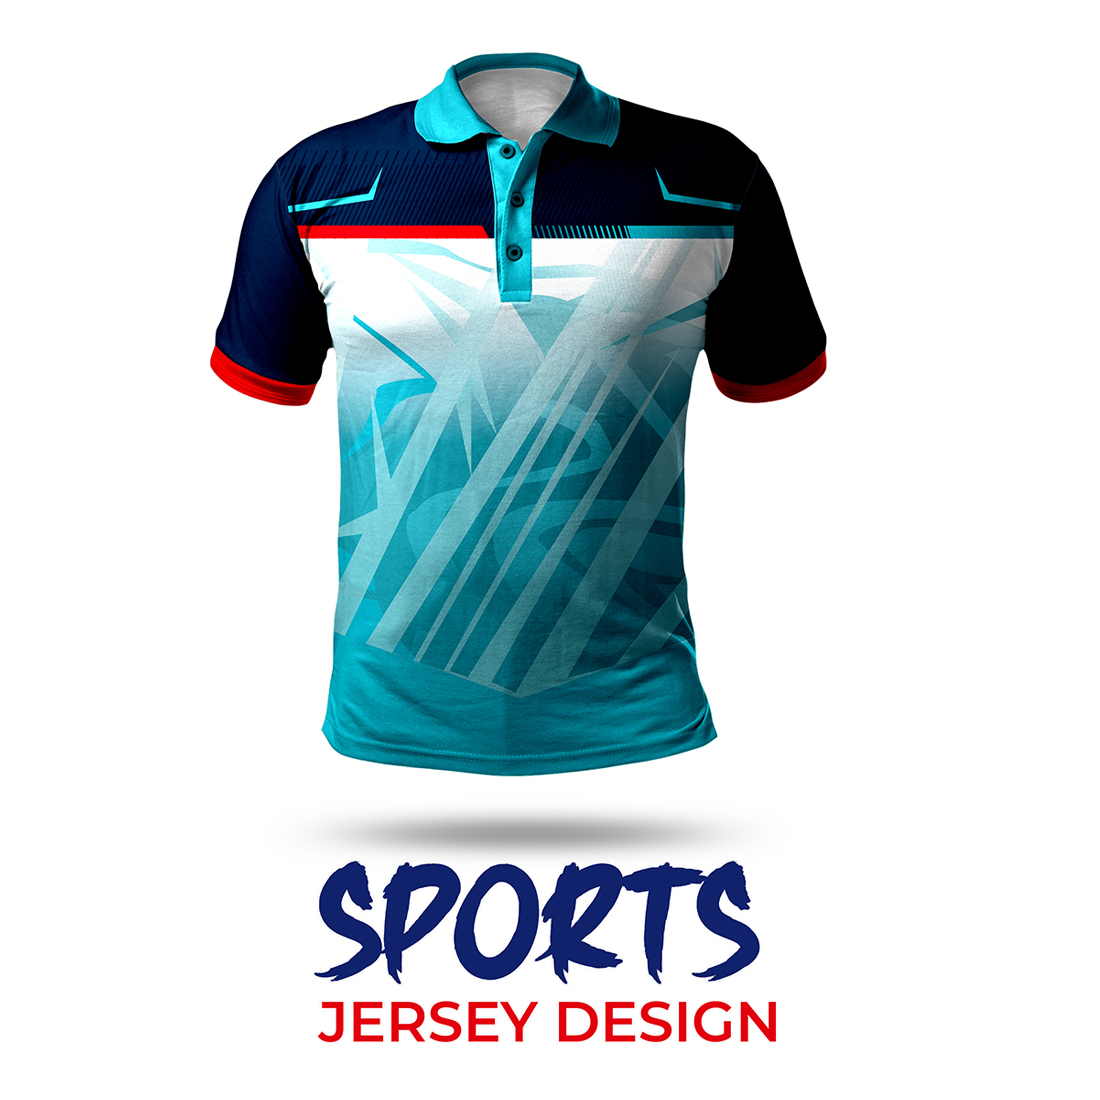 Jersey Design, Sports wear texture design cover image.